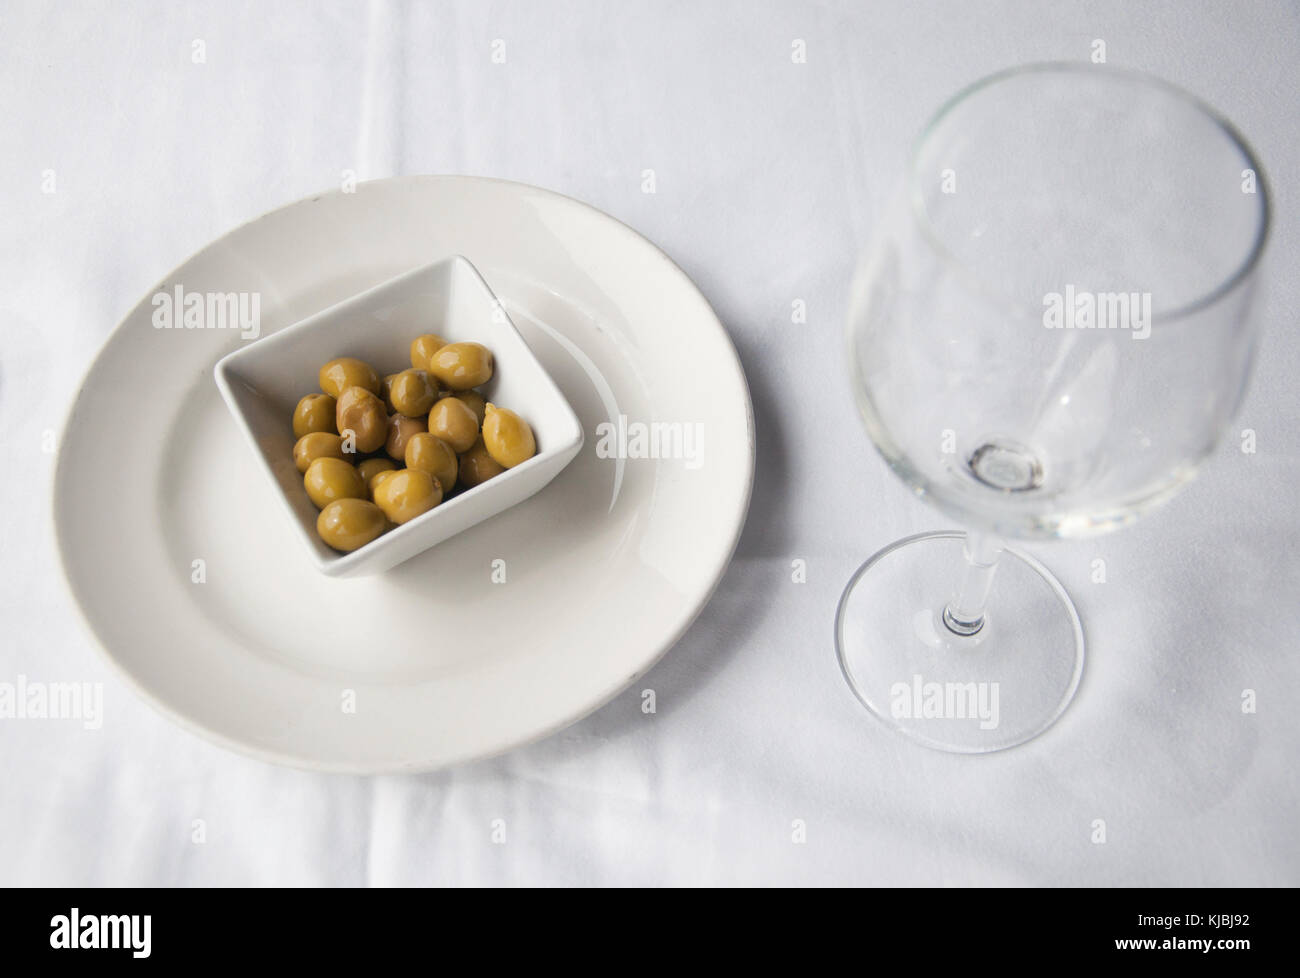 Green olives in a dish like an appetizer Stock Photo